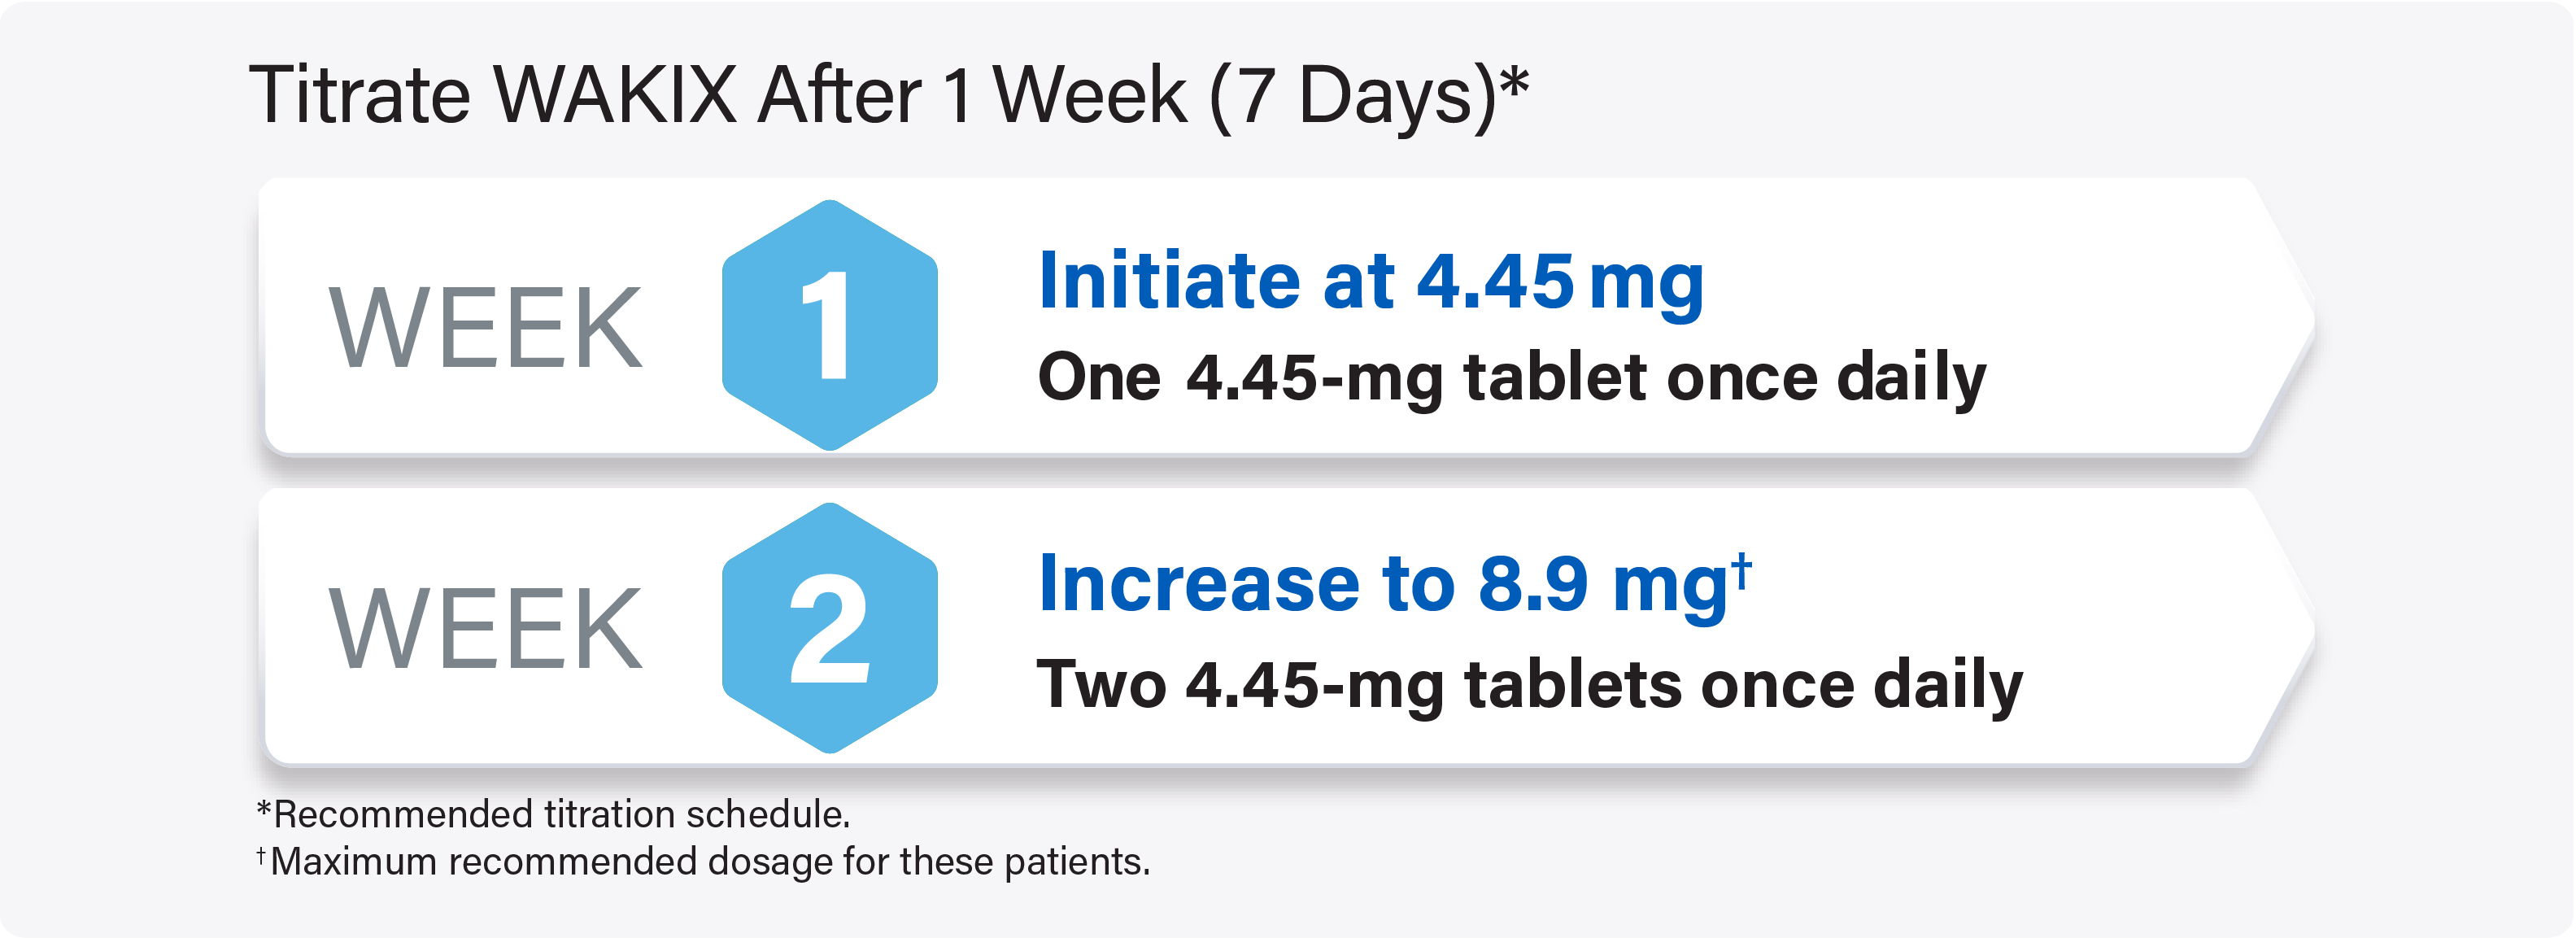 Titration schedule for WAKIX with strong CYP2D6 inhibitors in pediatric patients less than 40 kg graphic